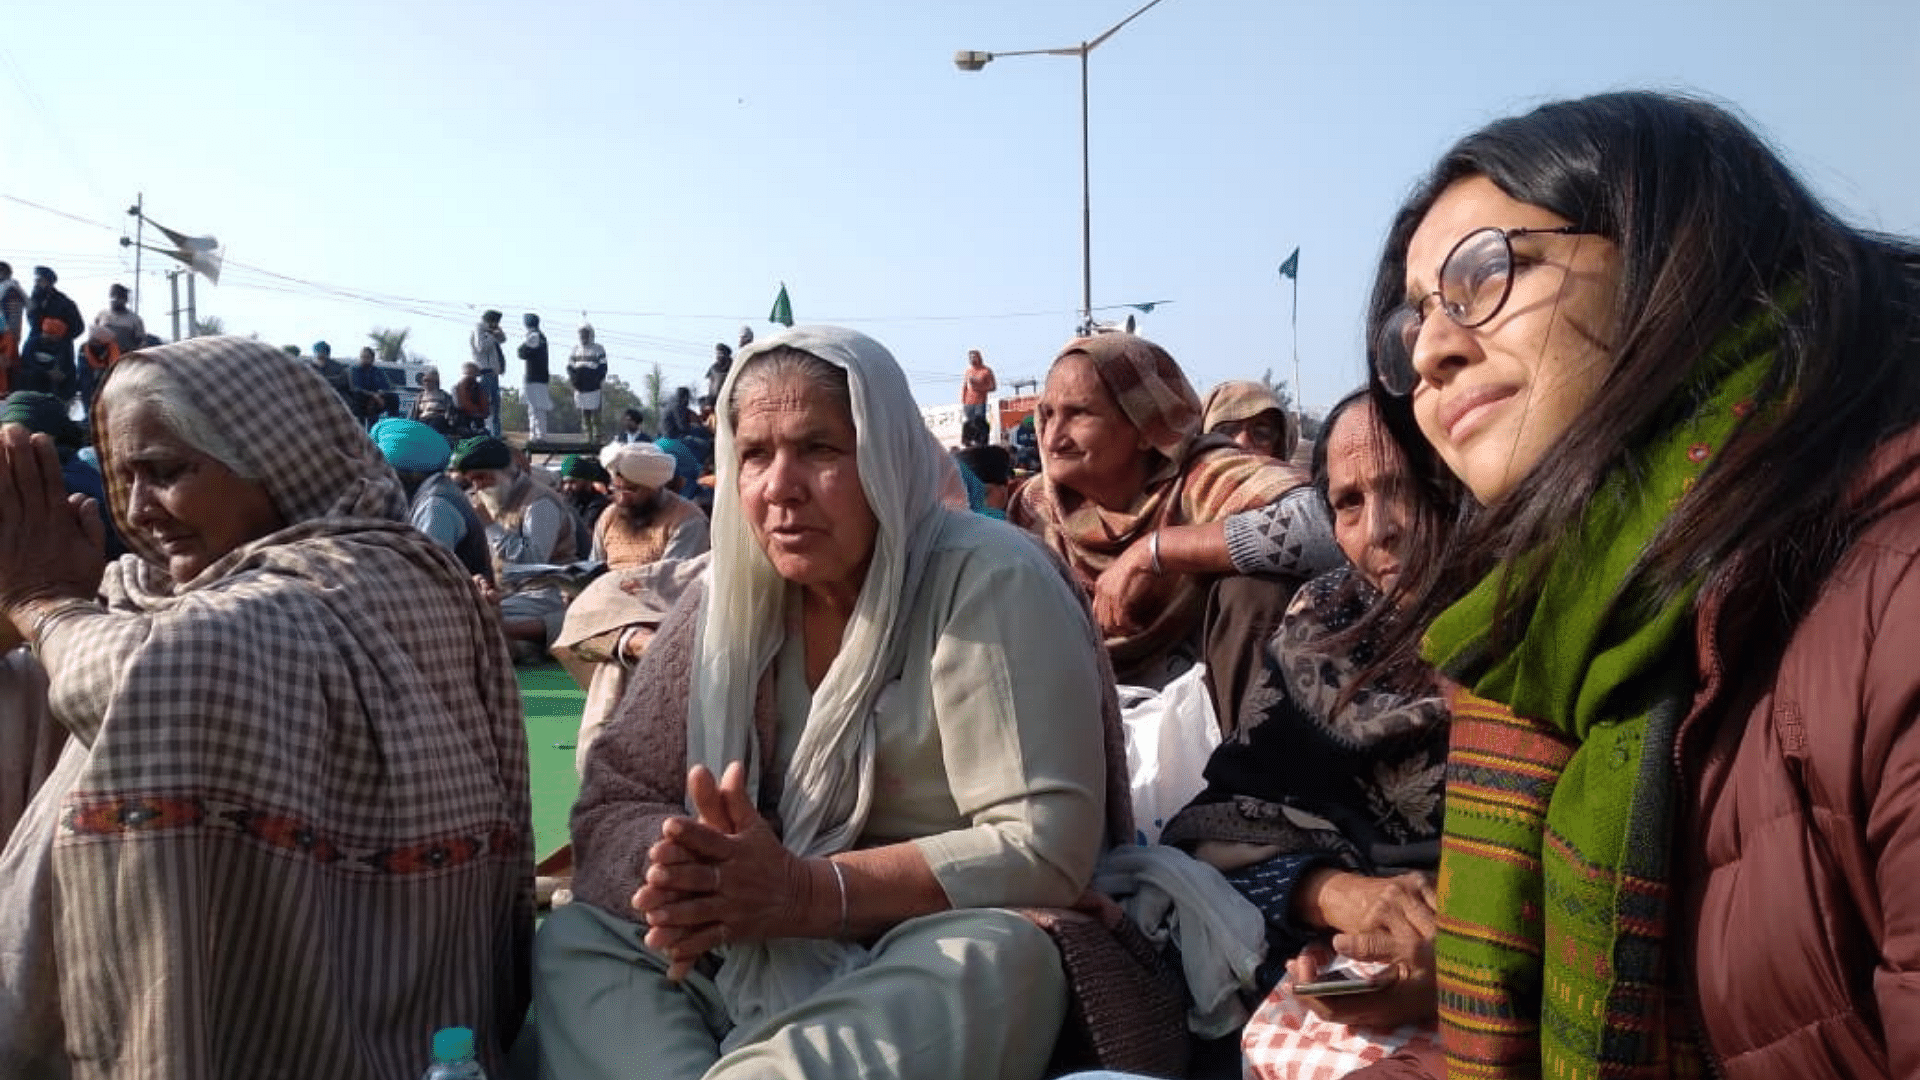 Actor Swara Bhasker at the farmers' protest in Delhi.